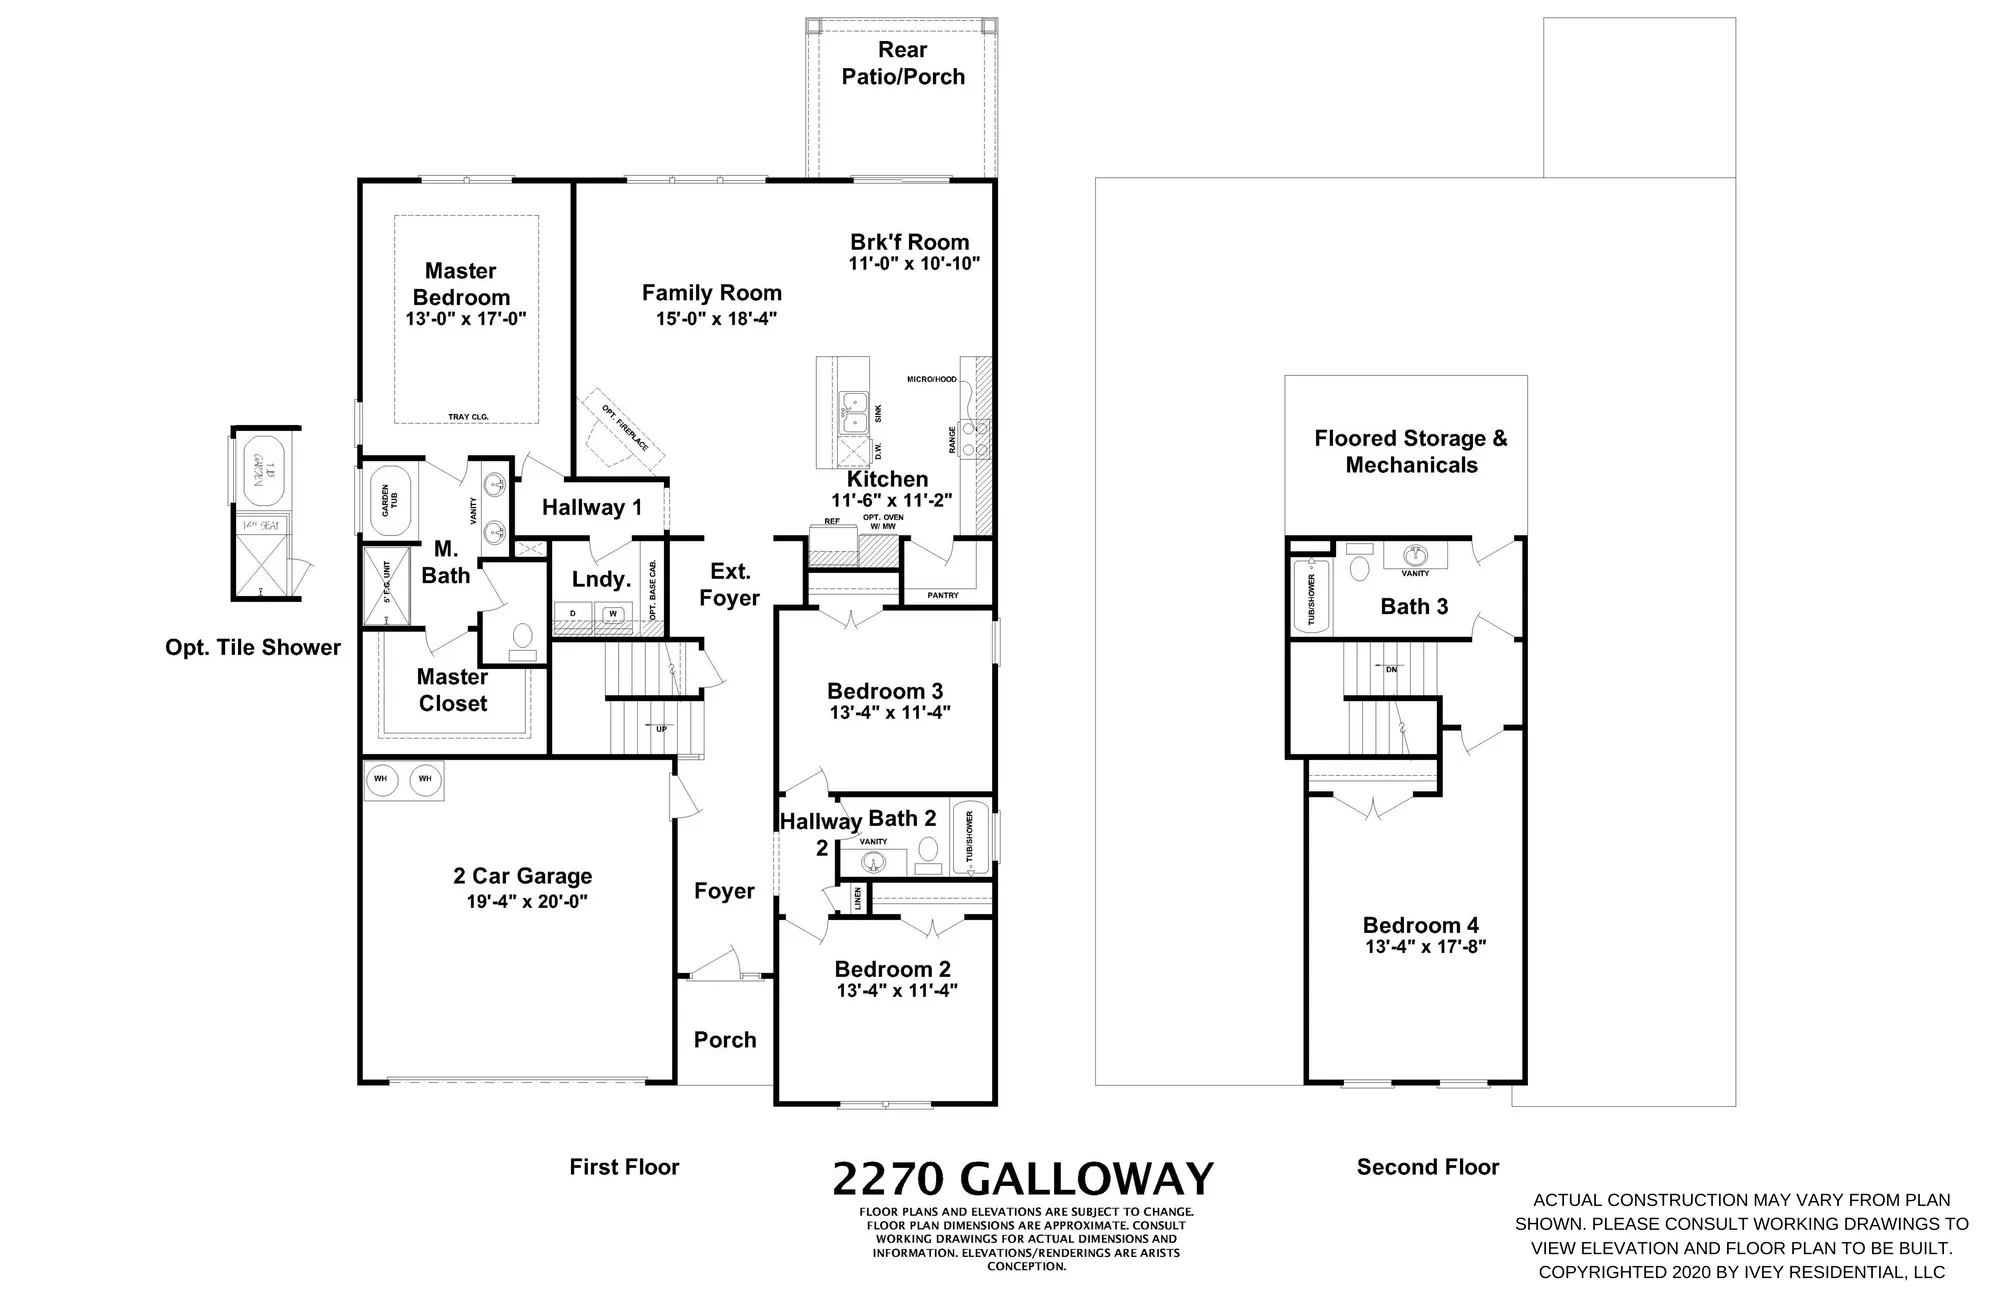 Galloway Ivey Residential B&W Fpls